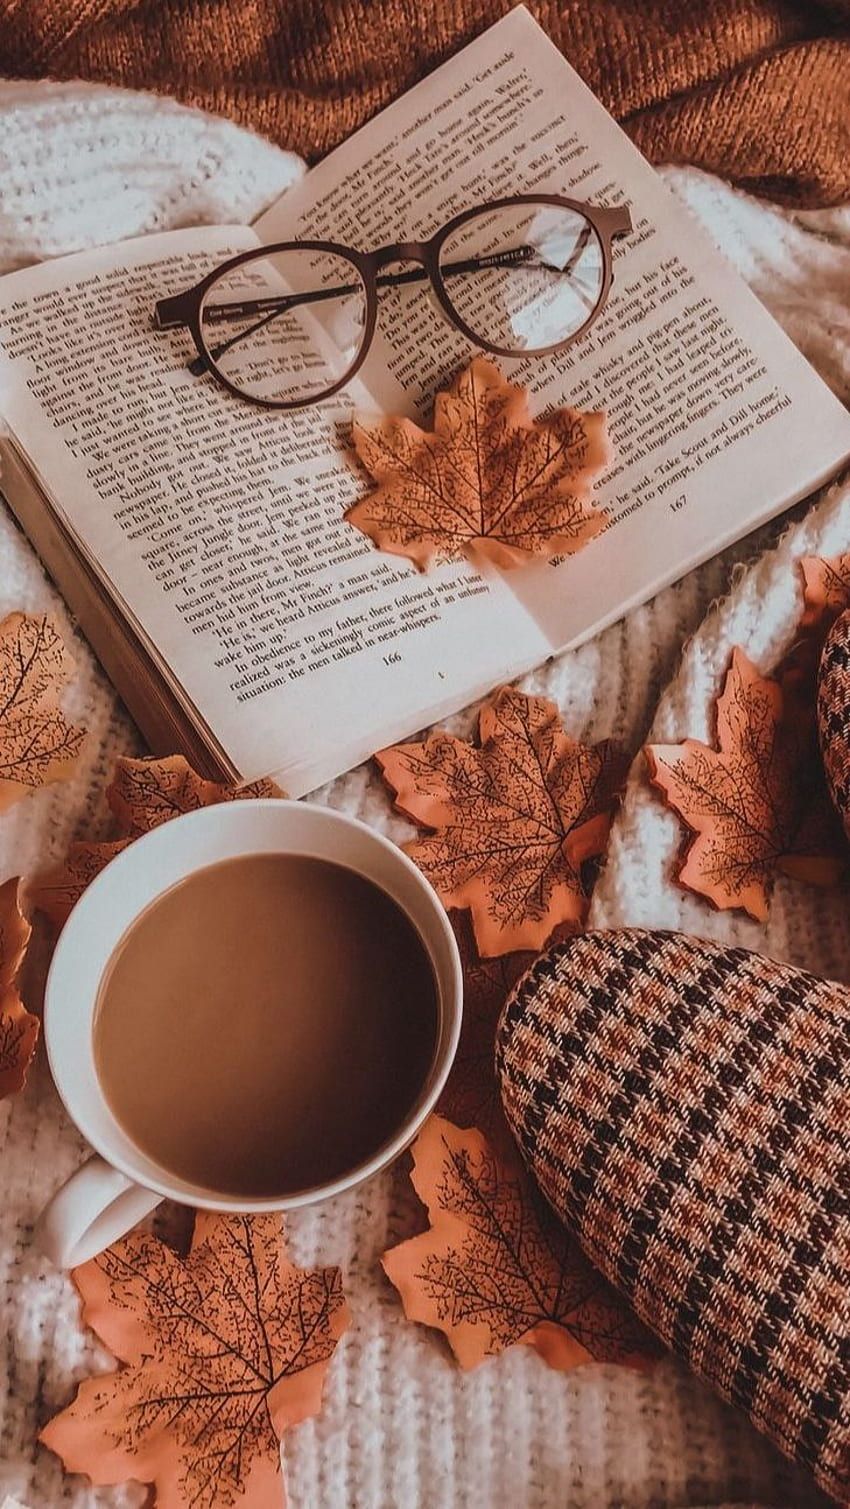 A cozy autumn aesthetic with a book, glasses, and a cup of coffee. - Fall, cozy, study, coffee